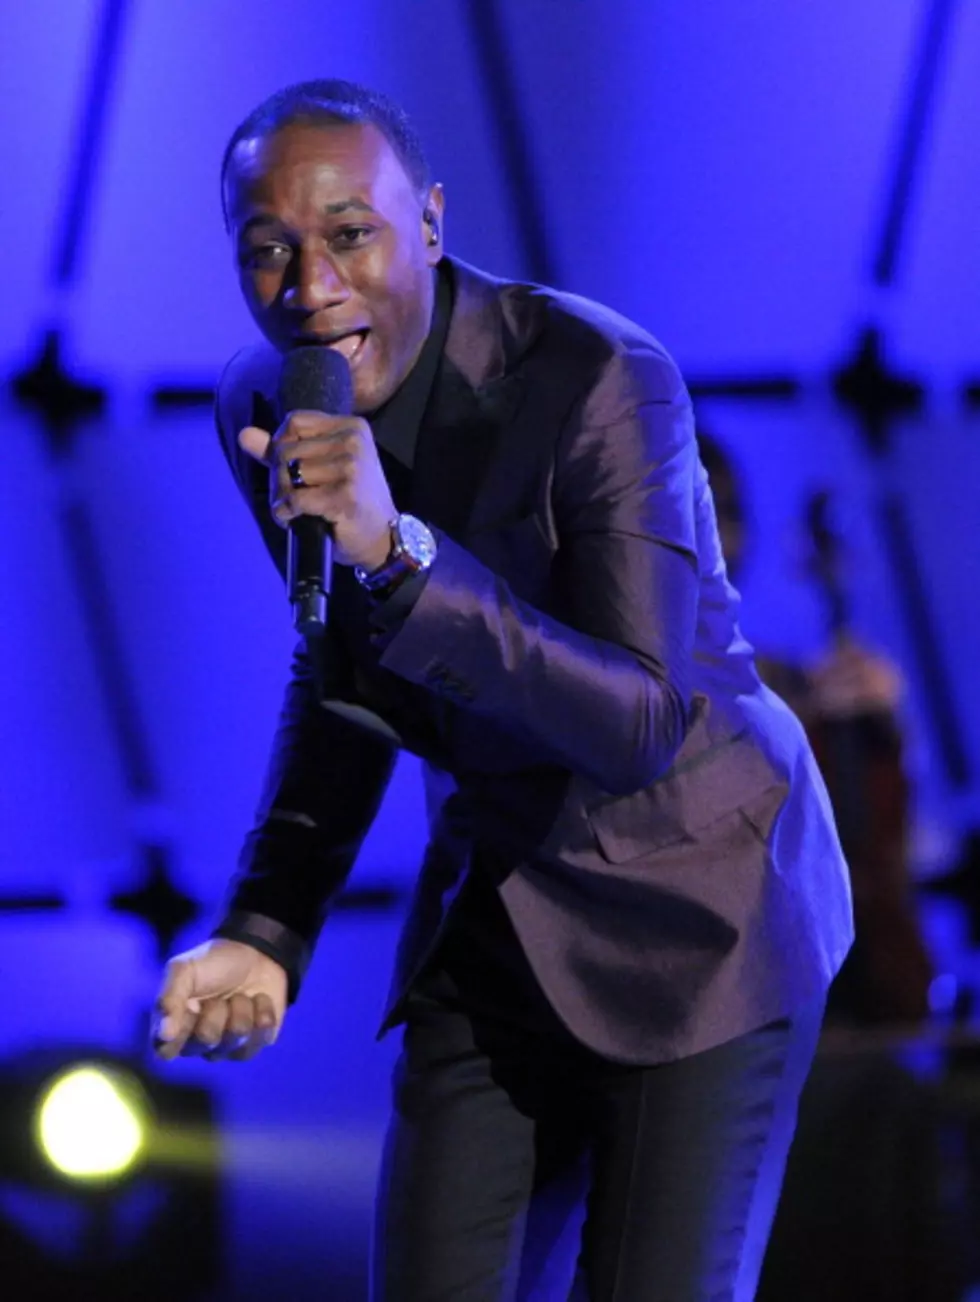 Aloe Blacc – The Guy Who Sings ‘Wake Me Up’ Was On DWTS